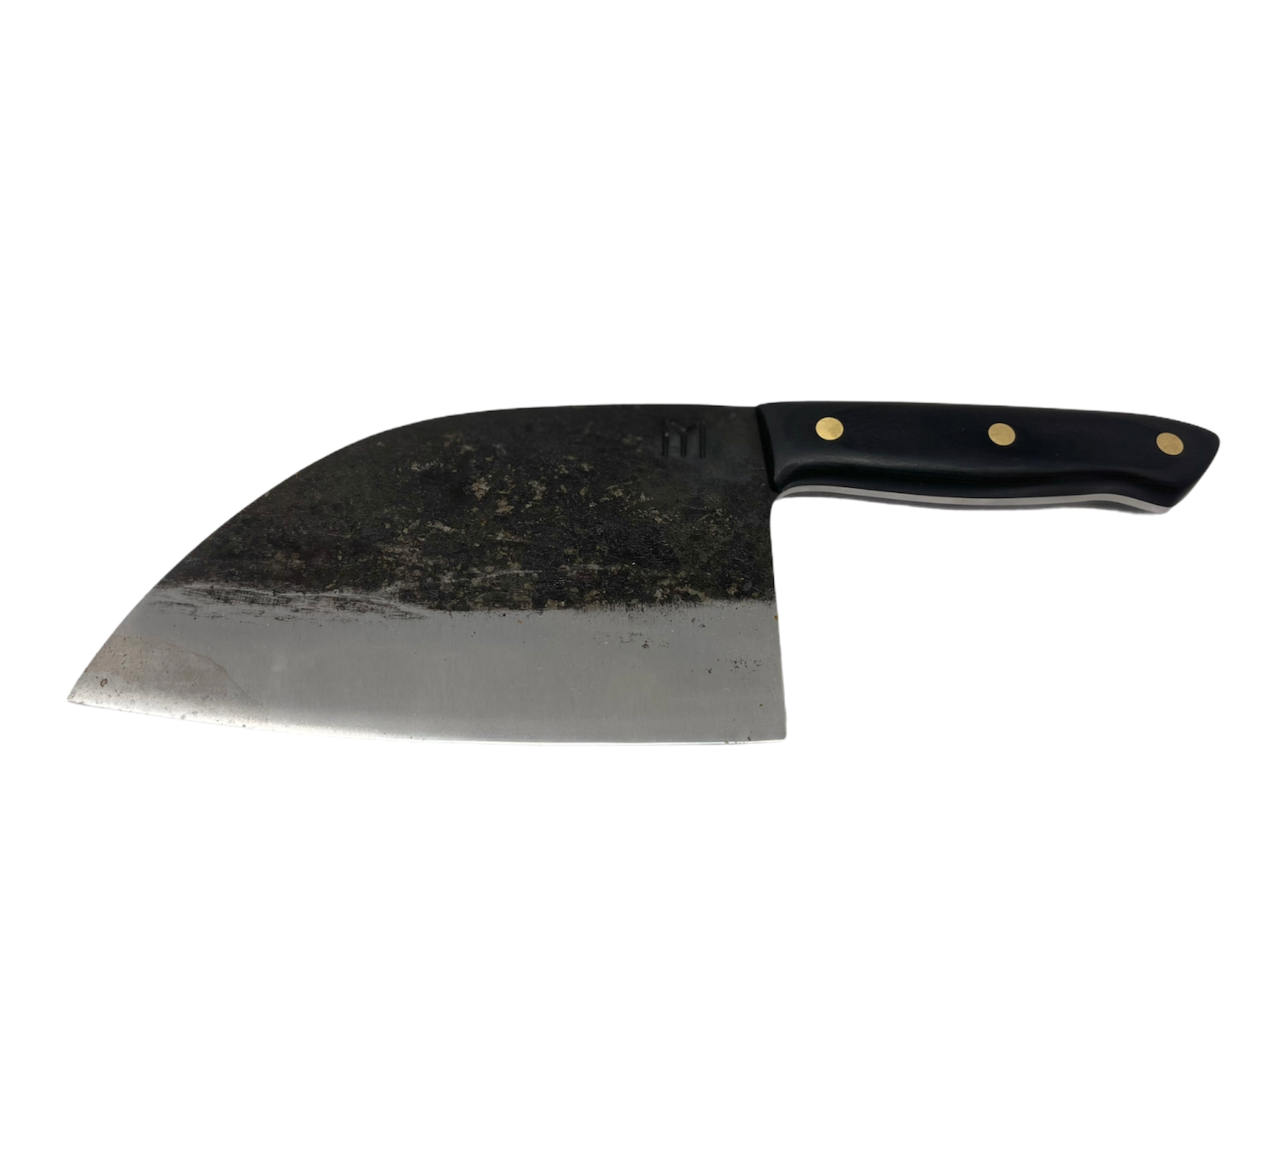 Original Serbian Chef Knife - Unrivaled Quality Exclusive White Hide